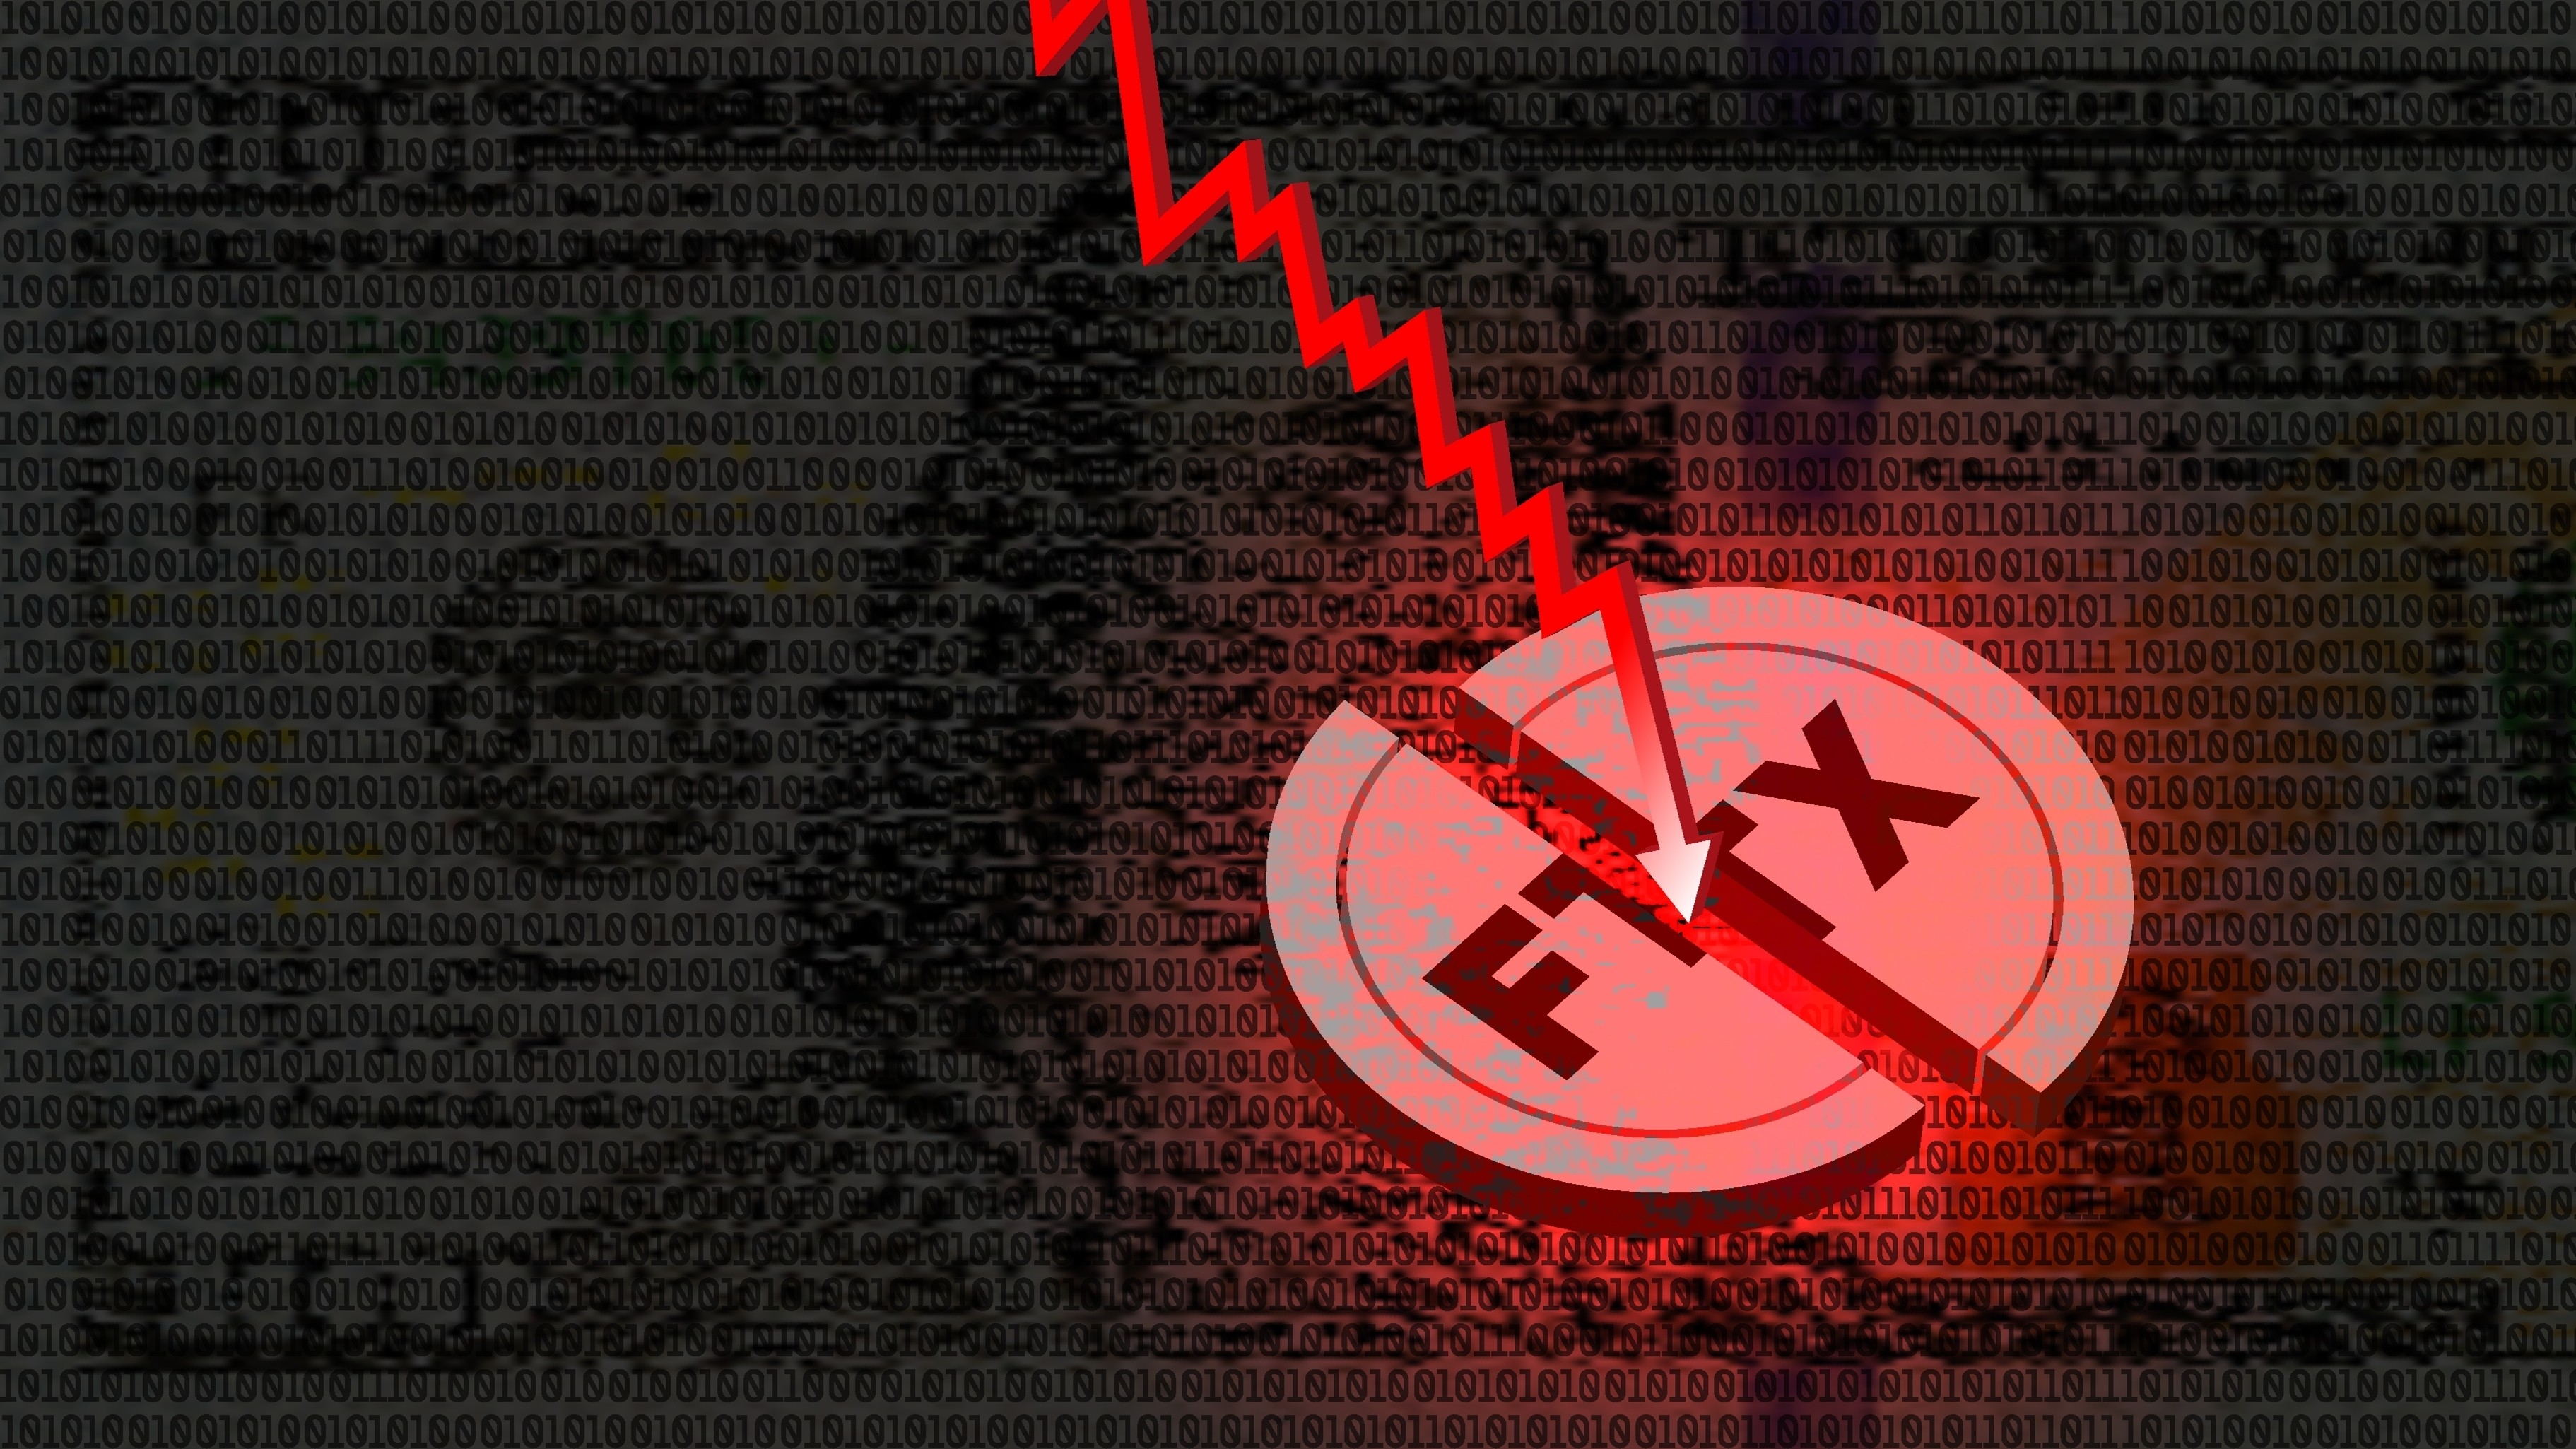 FTX, once one of the world’s largest cryptocurrency exchanges, filed for United States bankruptcy court protection last November, saying it owed US$3 billion to its top 50 creditors. Photo: Shutterstock